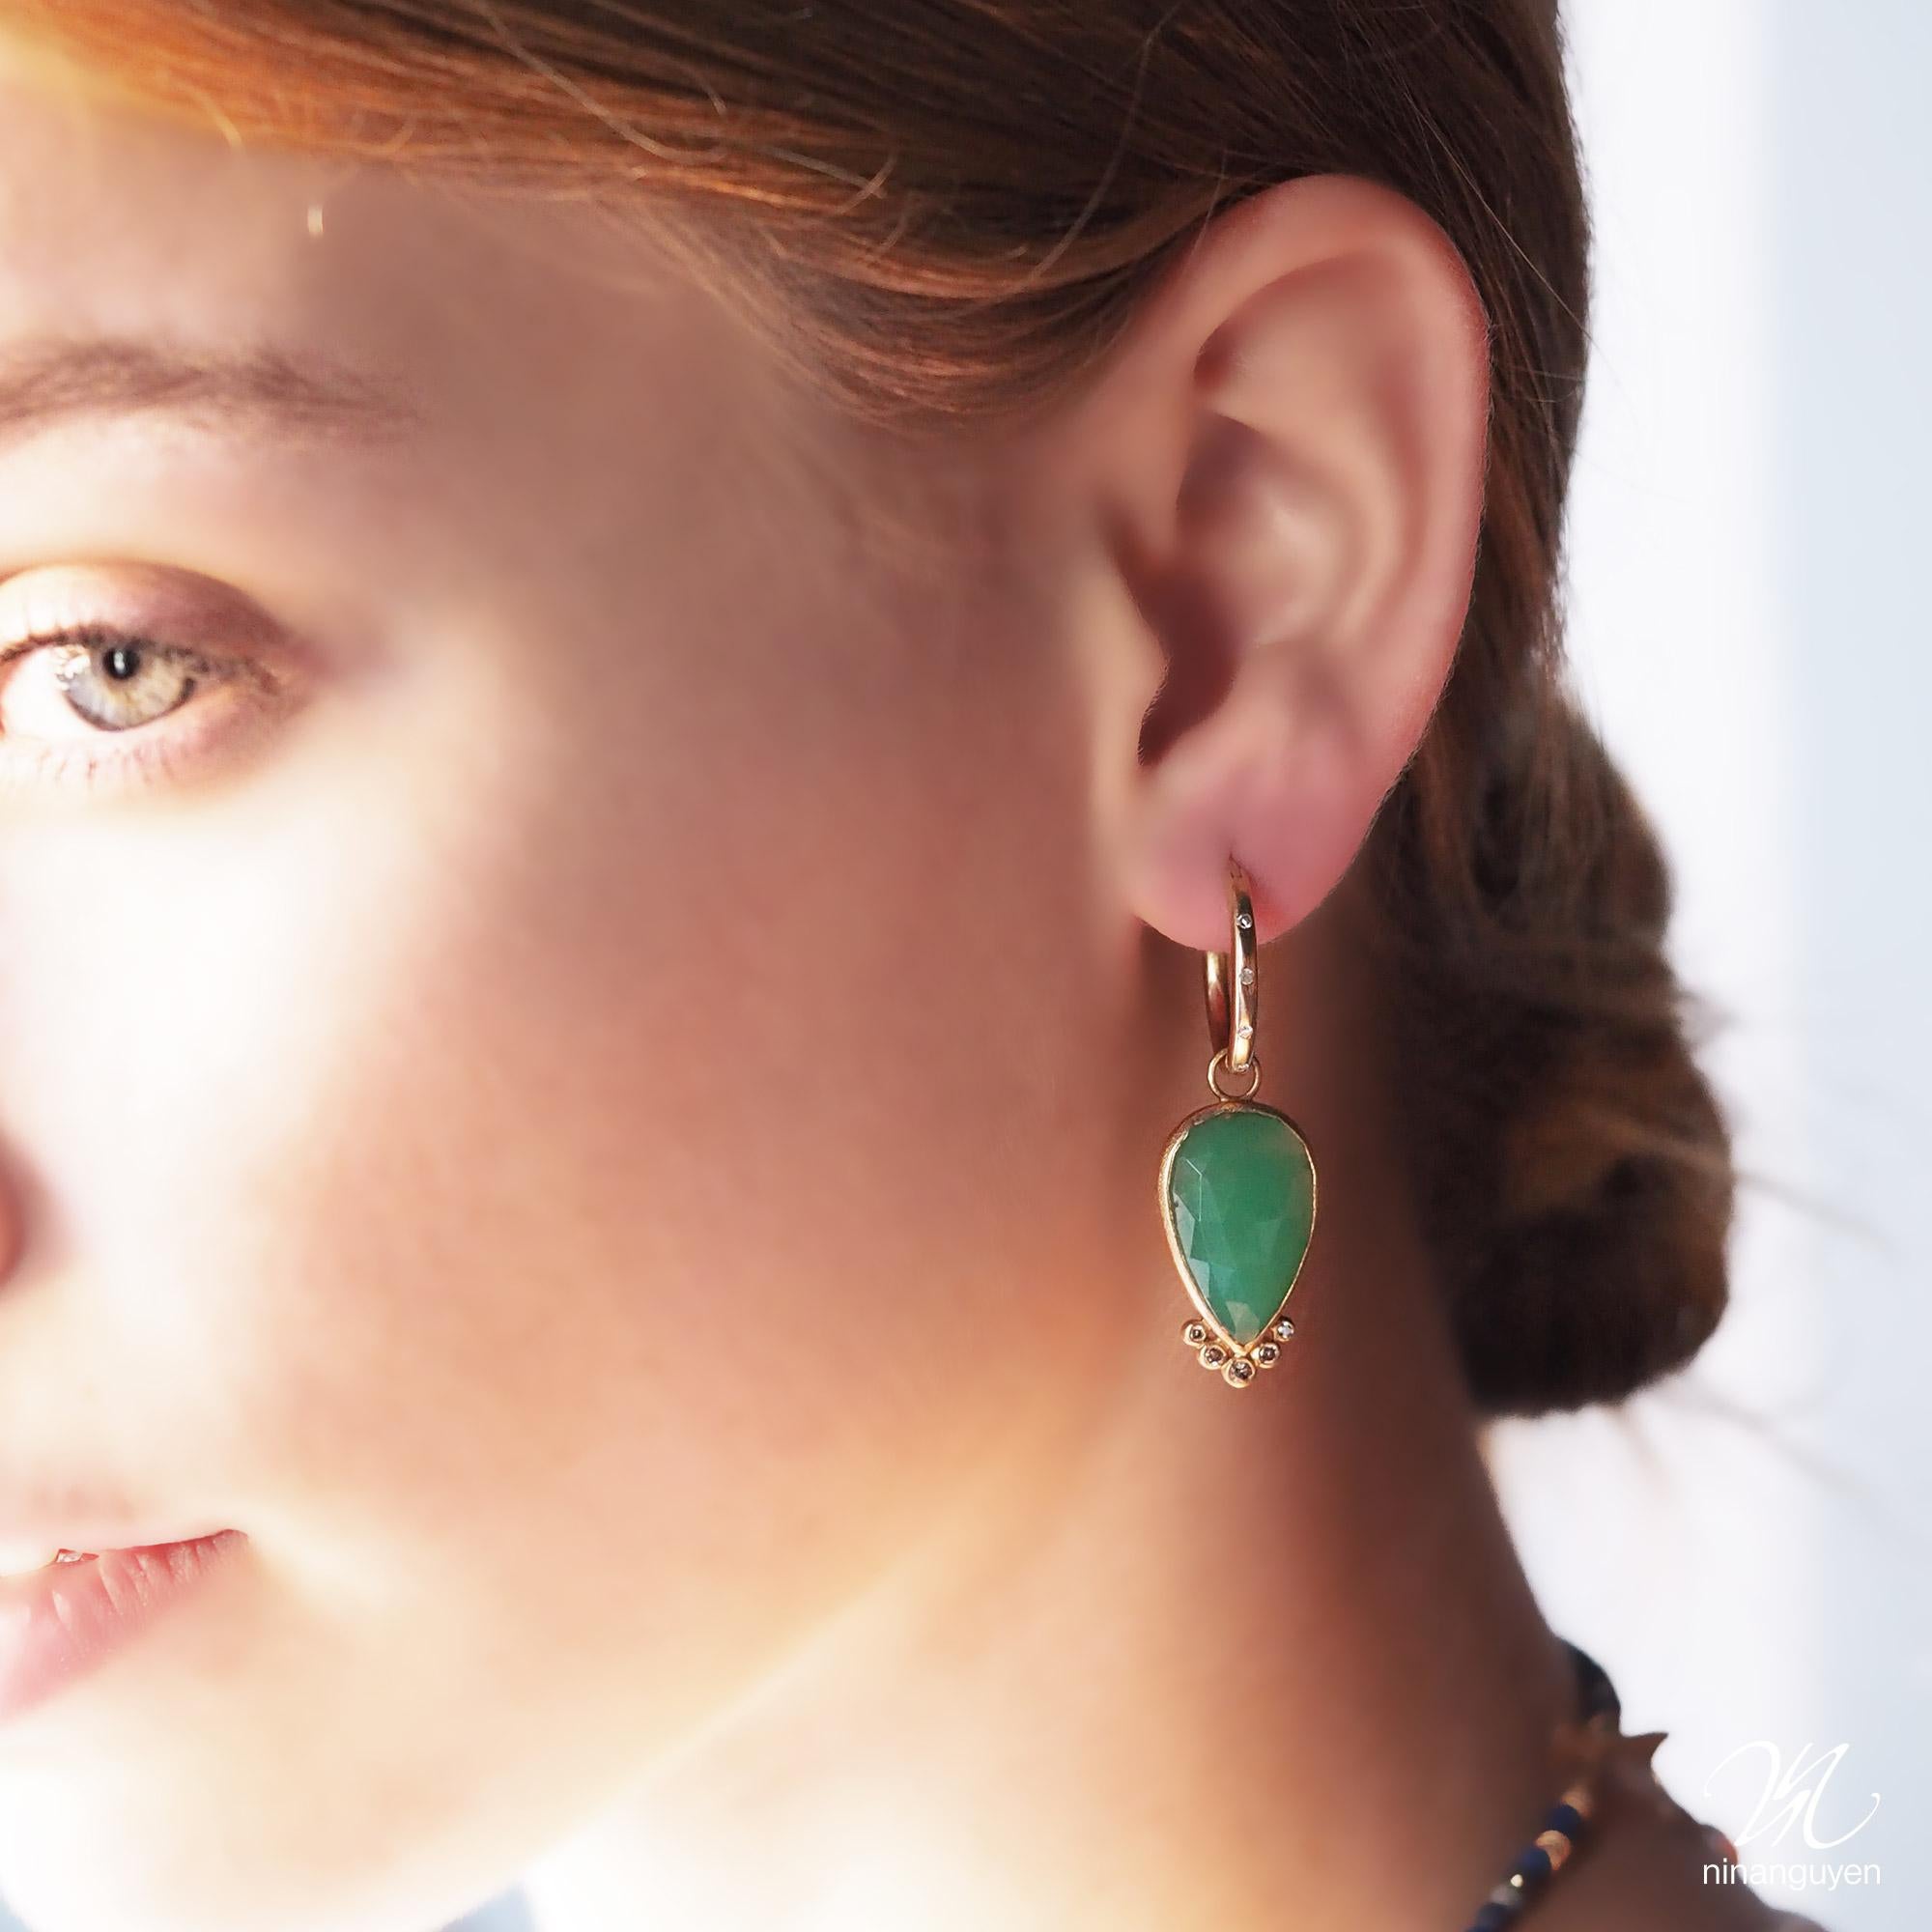 With vibrant chrysoprase in a petal-like pear shape, the diamond-accented Mia Medium Gold Charms bloom with any of our hoops and mix well with other styles.

Nina Nguyen Design's patent-pending earrings have an element on the back of the stud or